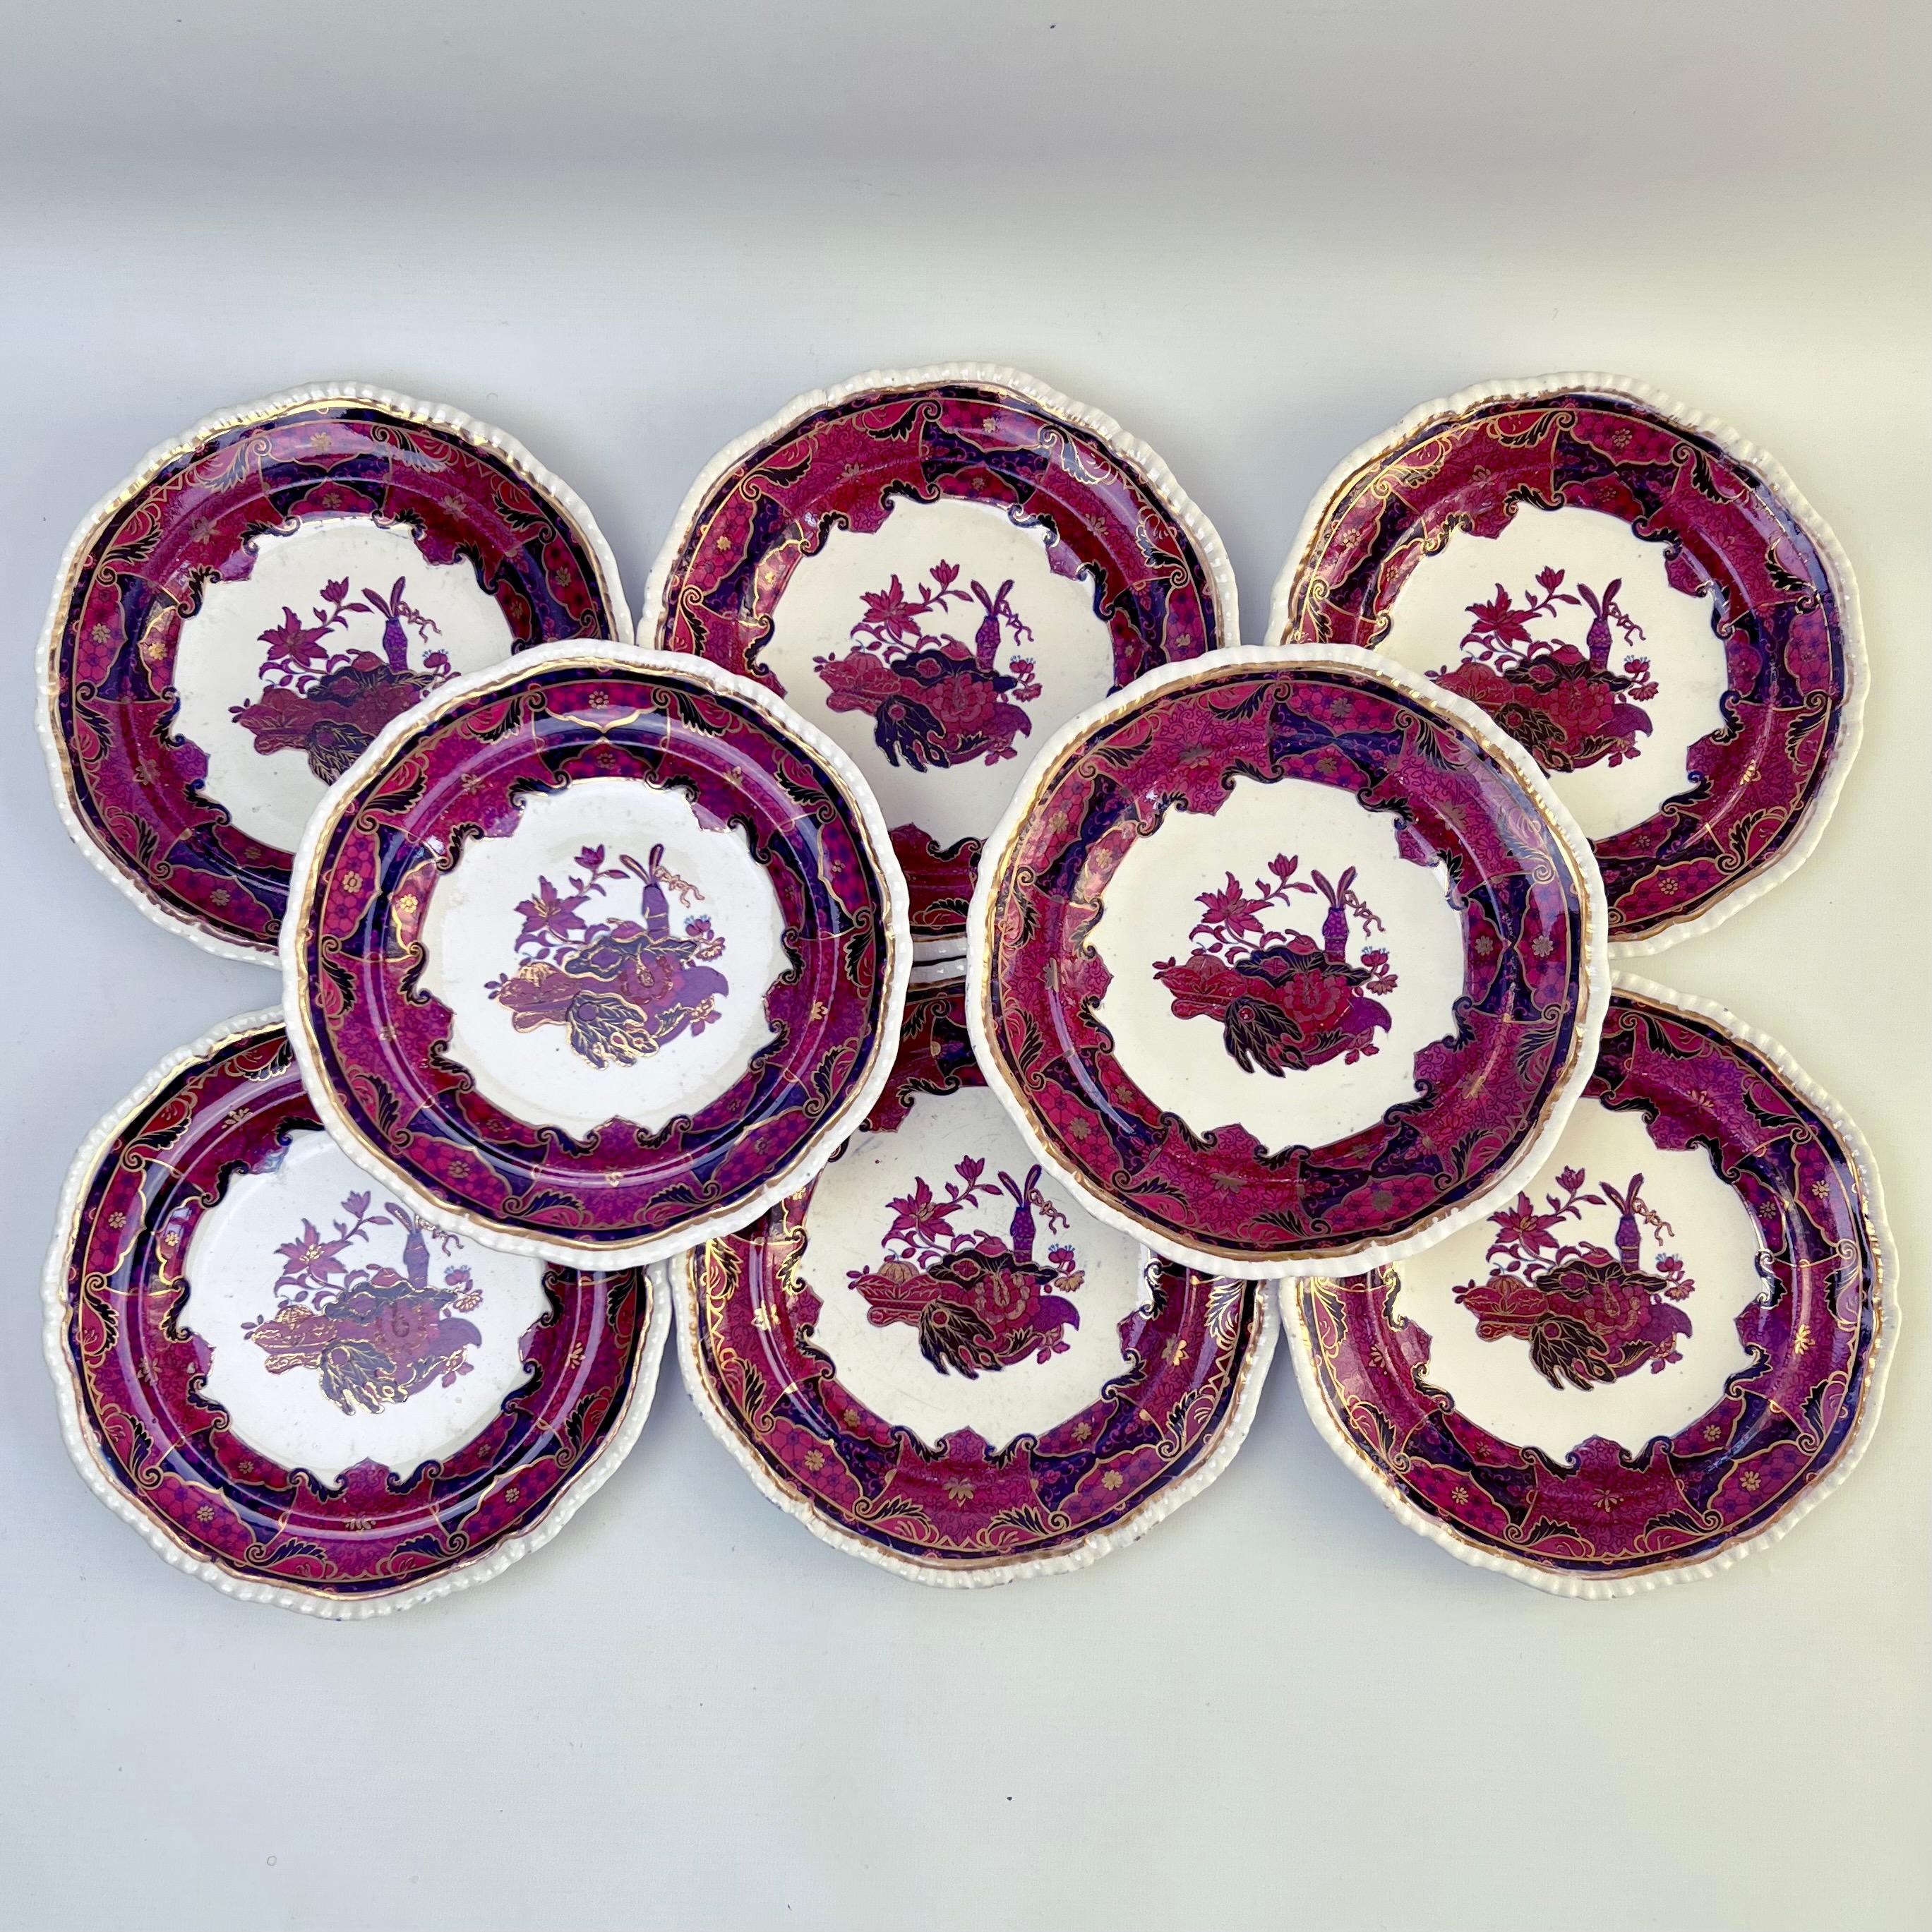 Spode Imperial China Dessert Service, Frog Pattern in Mauve, Regency circa 1828 For Sale 1